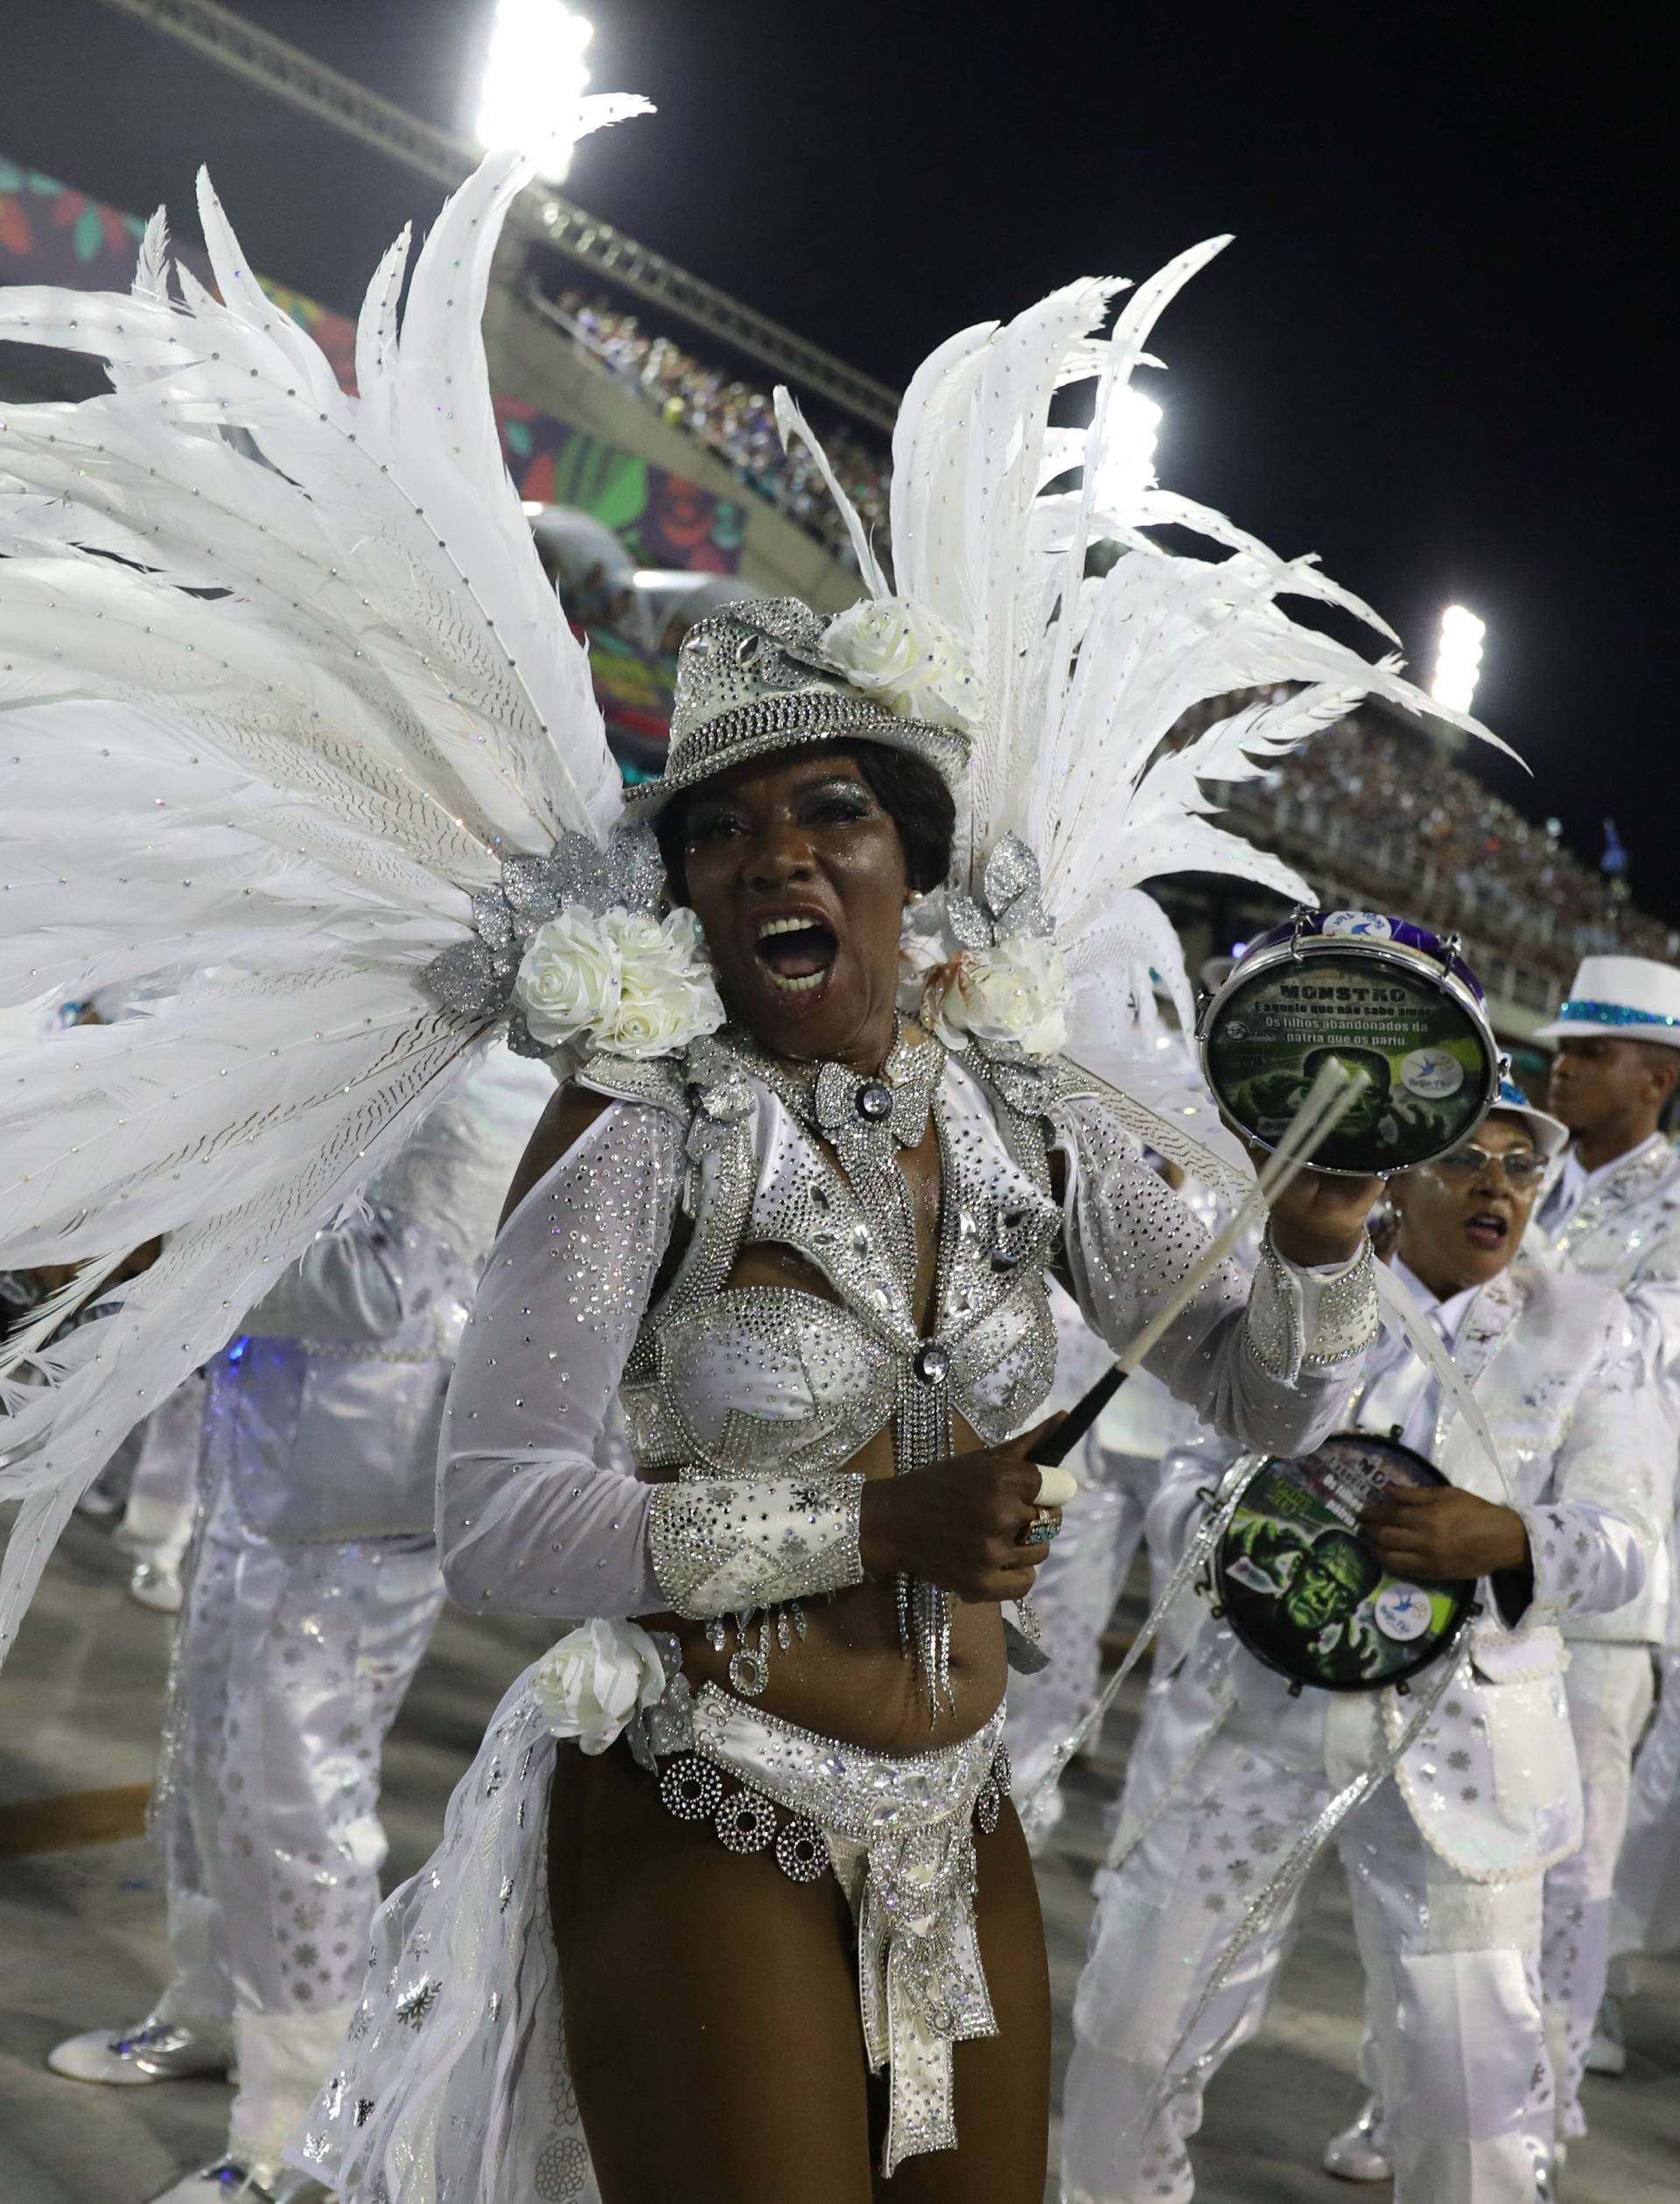 Revellers from Beija-Flor samba school perform during the second night of the Carnival parade at the Sambadrome in Rio de Janeiro